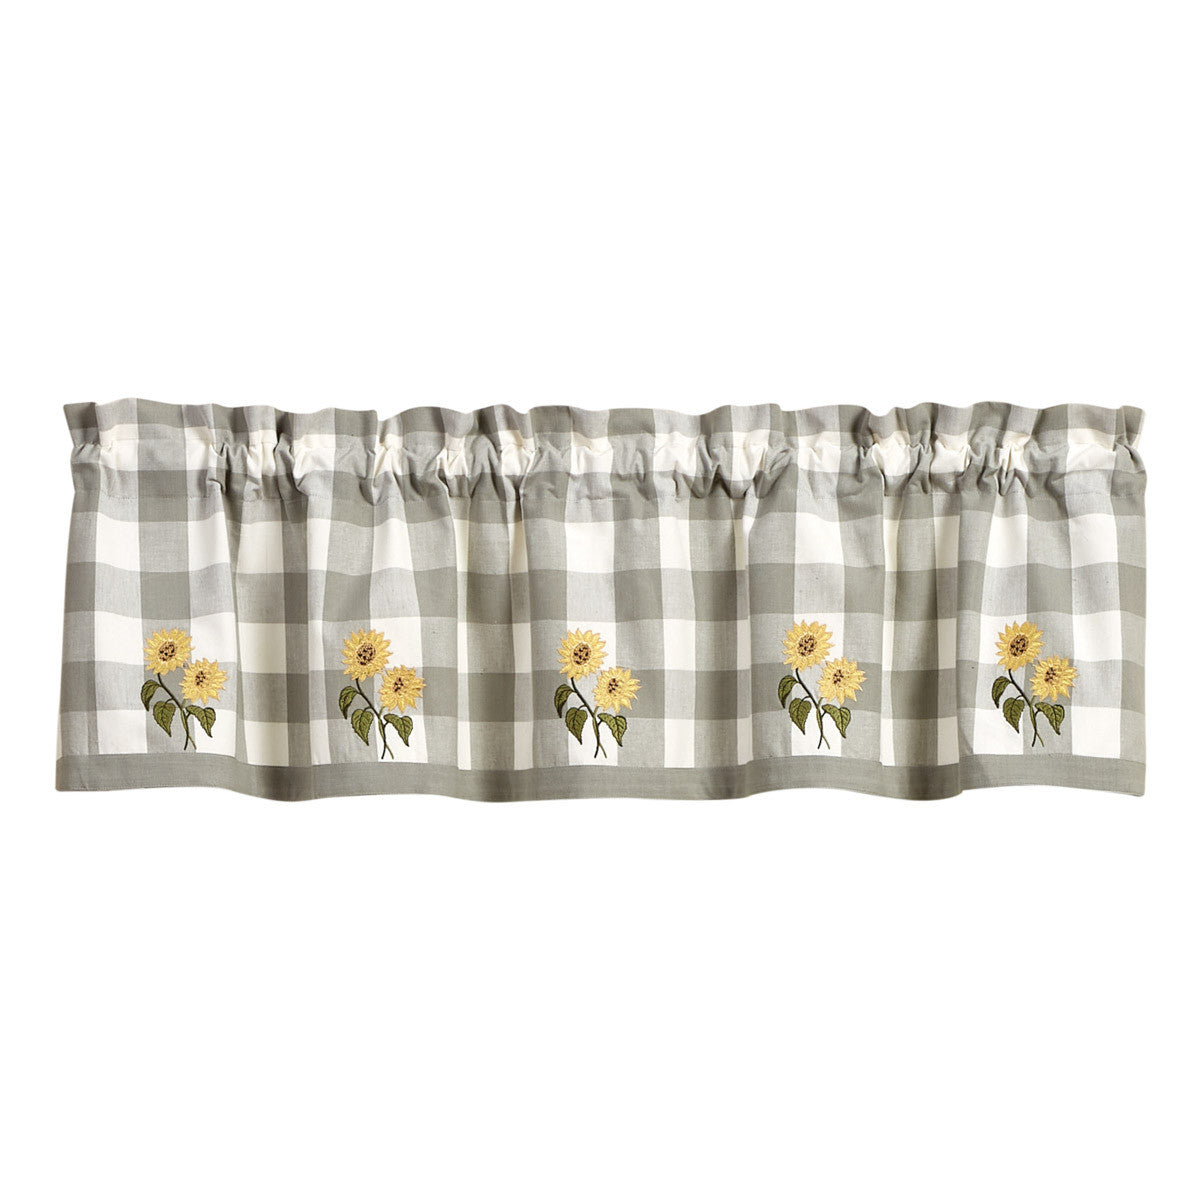 Wicklow Check Sunflower Embroidered Lined Valance Curtains 14" L - Park Designs